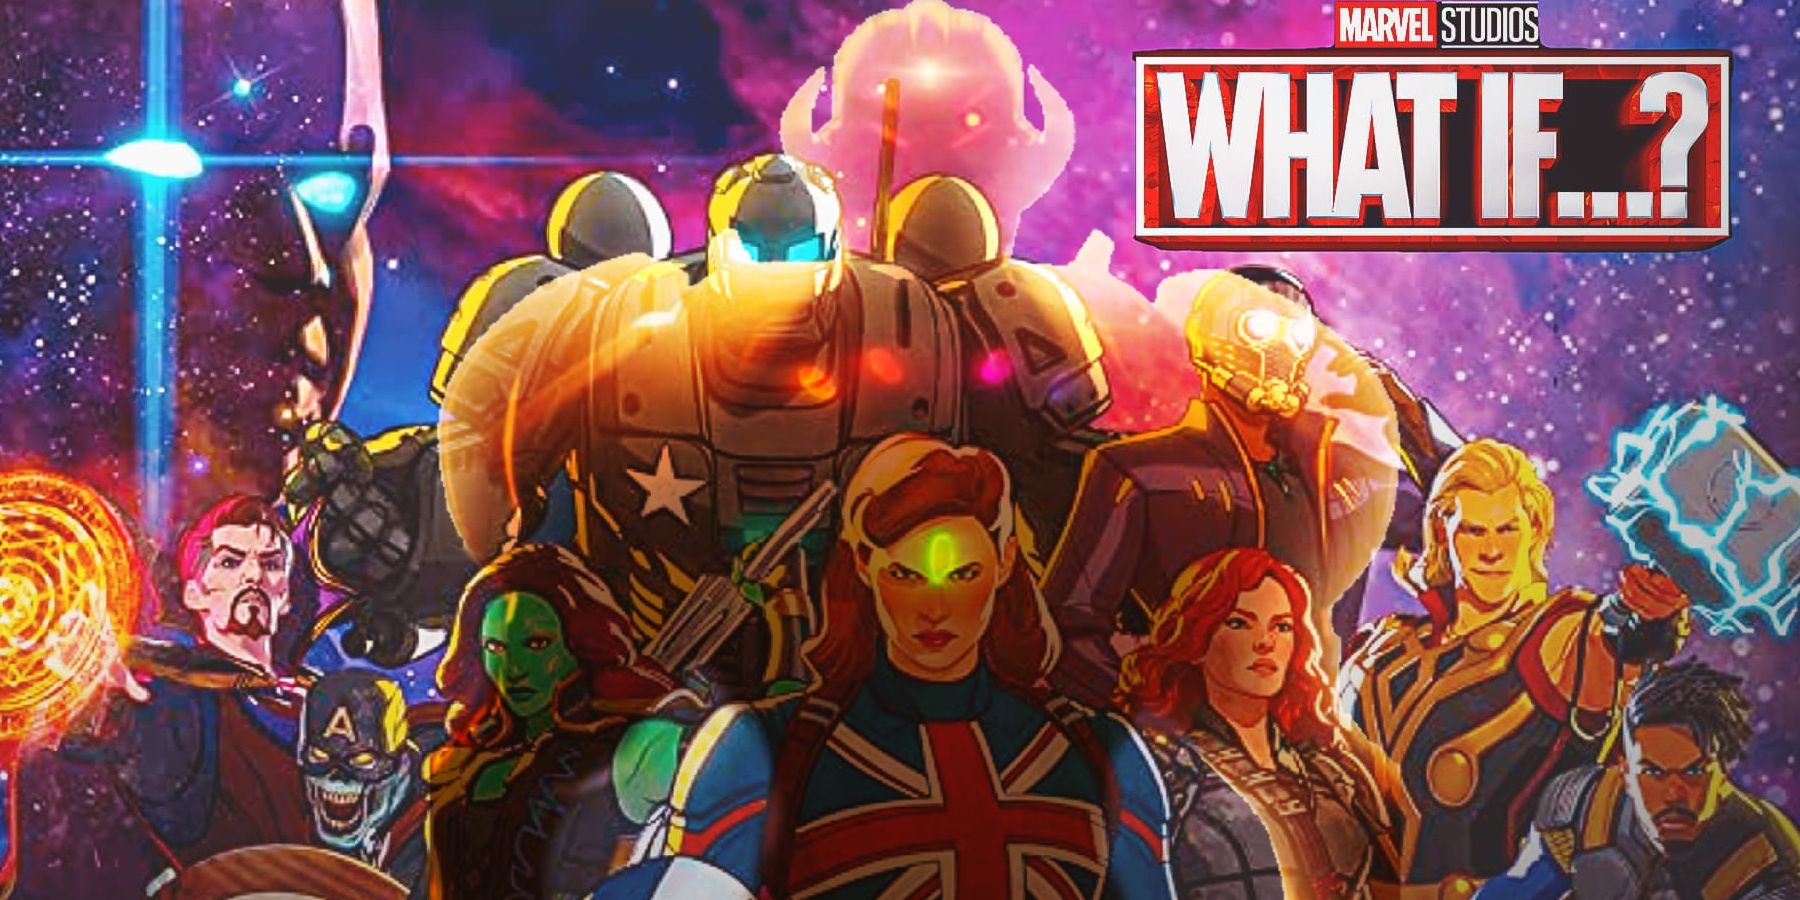  What If- Marvel zombies